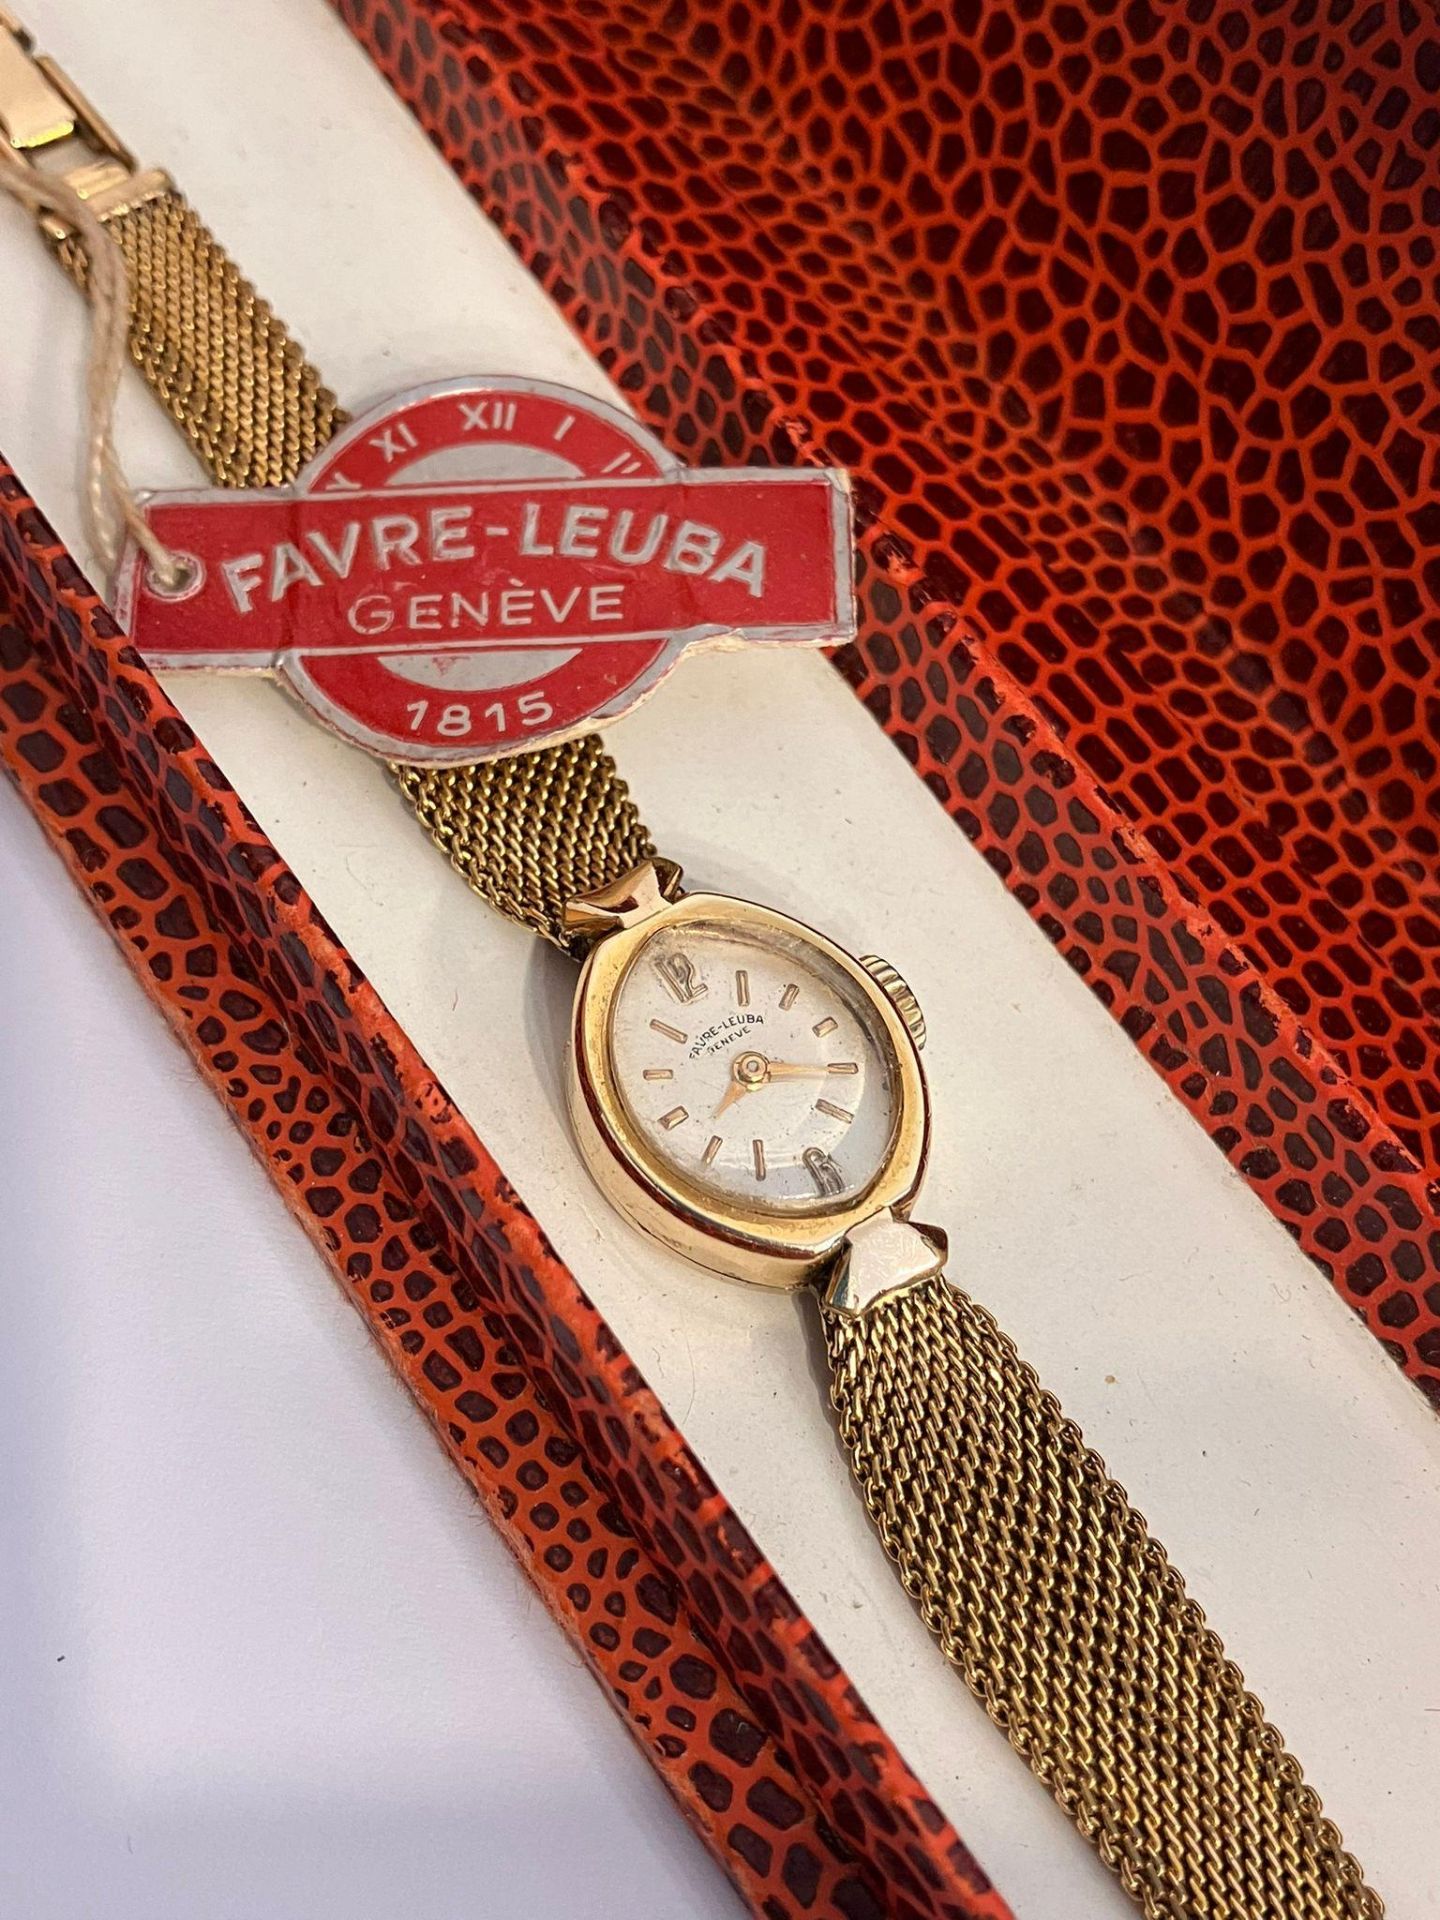 Ladies vintage FAVRE LEUBA ROLLED GOLD WRISTWATCH. Complete with original box and service receipts